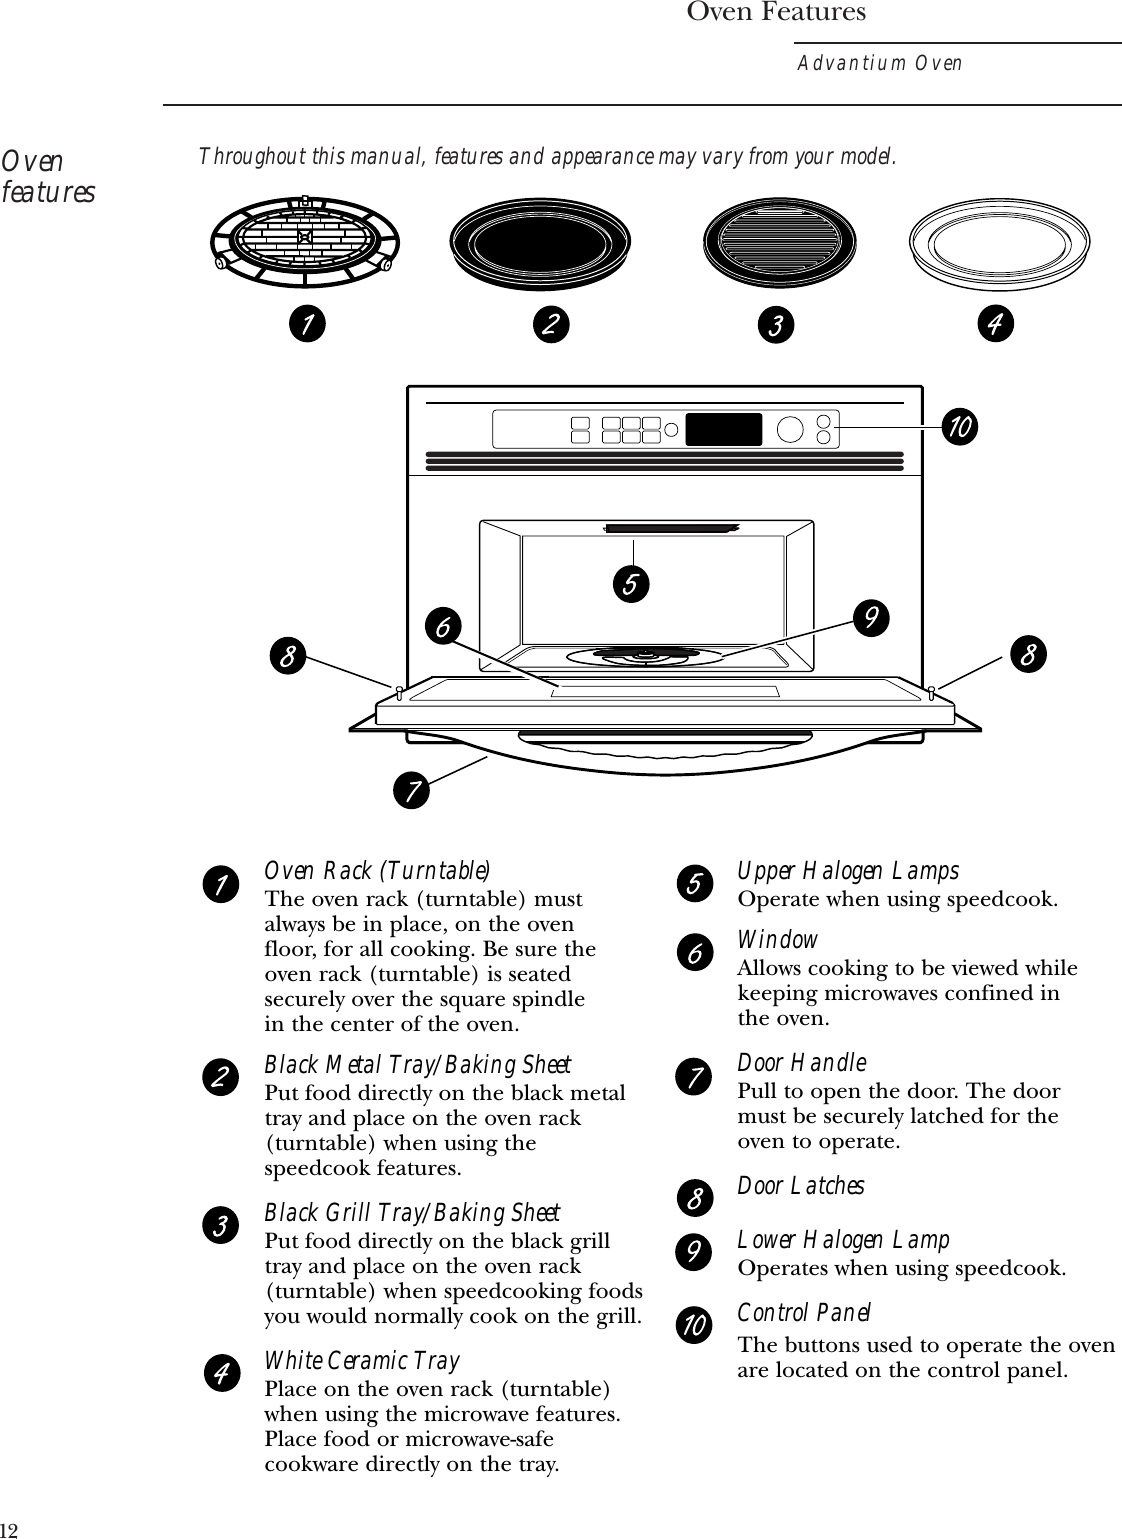 Oven FeaturesAdvantium Oven12OvenfeaturesThroughout this manual, features and appearance may vary from your model.Oven Rack (Turntable)The oven rack (turntable) must always be in place, on the oven floor, for all cooking. Be sure the oven rack (turntable) is seated securely over the square spindle in the center of the oven. Black Metal Tray/Baking SheetPut food directly on the black metal tray and place on the oven rack(turntable) when using the speedcook features. Black Grill Tray/Baking SheetPut food directly on the black grill tray and place on the oven rack (turntable) when speedcooking foods you would normally cook on the grill.White Ceramic TrayPlace on the oven rack (turntable) when using the microwave features. Place food or microwave-safe cookware directly on the tray.Upper Halogen LampsOperate when using speedcook. WindowAllows cooking to be viewed while keeping microwaves confined in the oven.Door HandlePull to open the door. The door must be securely latched for the oven to operate.Door LatchesLower Halogen LampOperates when using speedcook.Control PanelThe buttons used to operate the oven are located on the control panel.